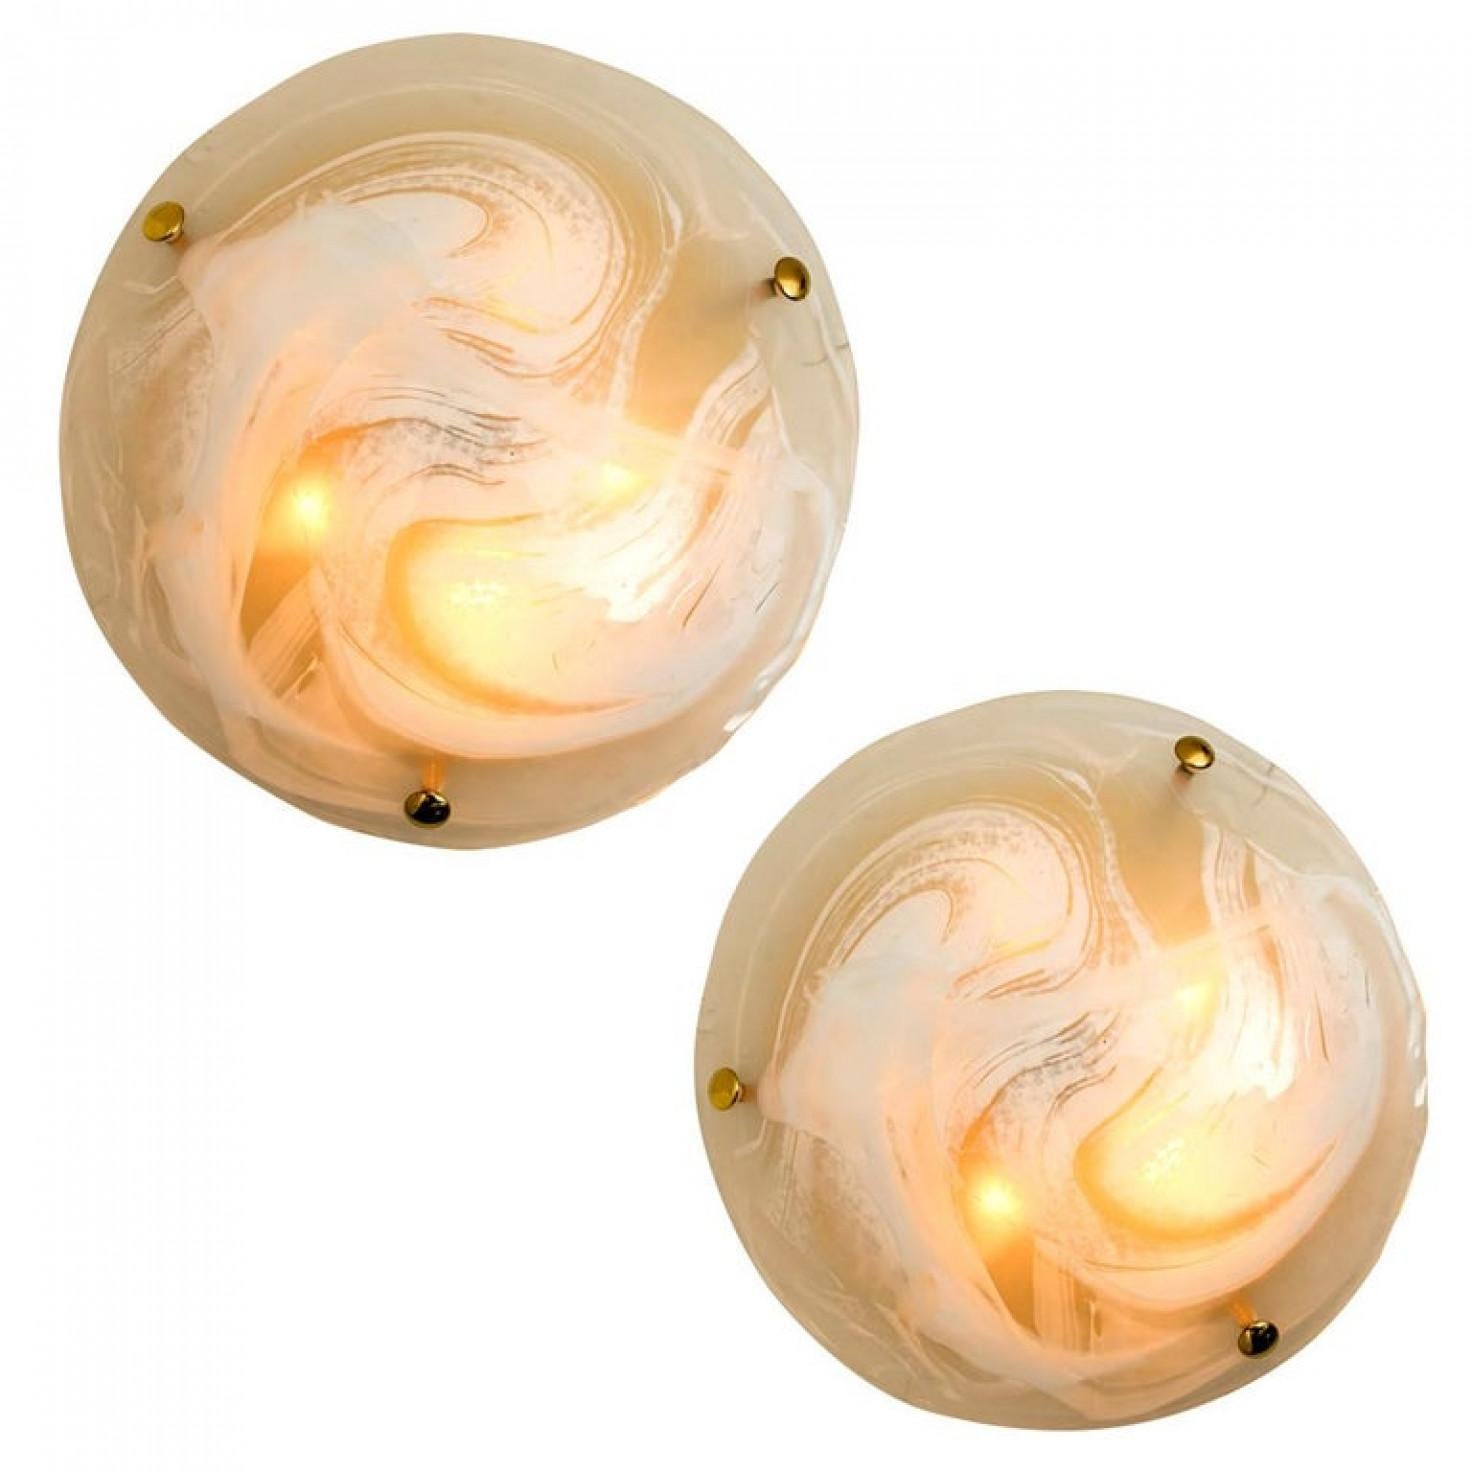 One of the Two Brass Massive Murano Glass Wall Lights or Flush Mounts, 1960 For Sale 4